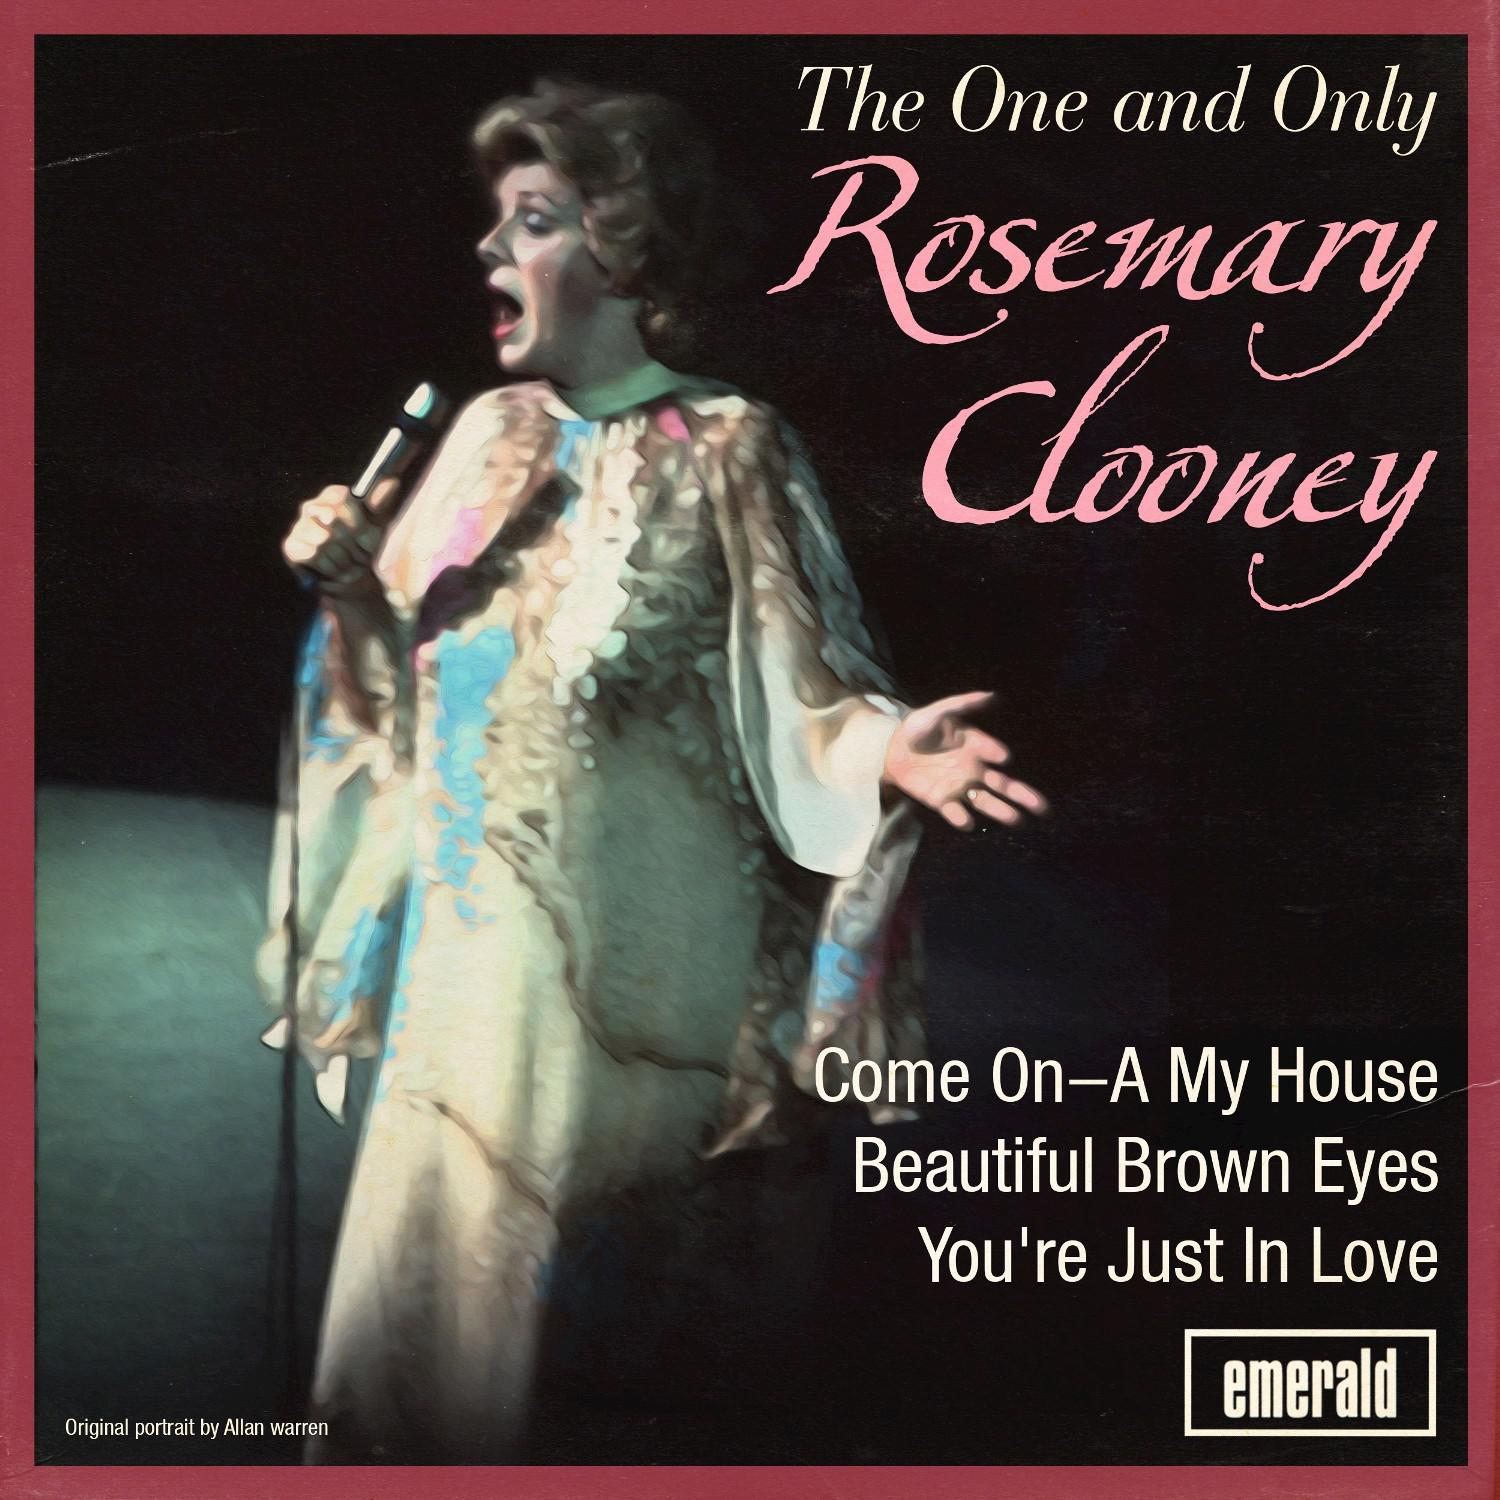 The One and Only Rosemary Clooney